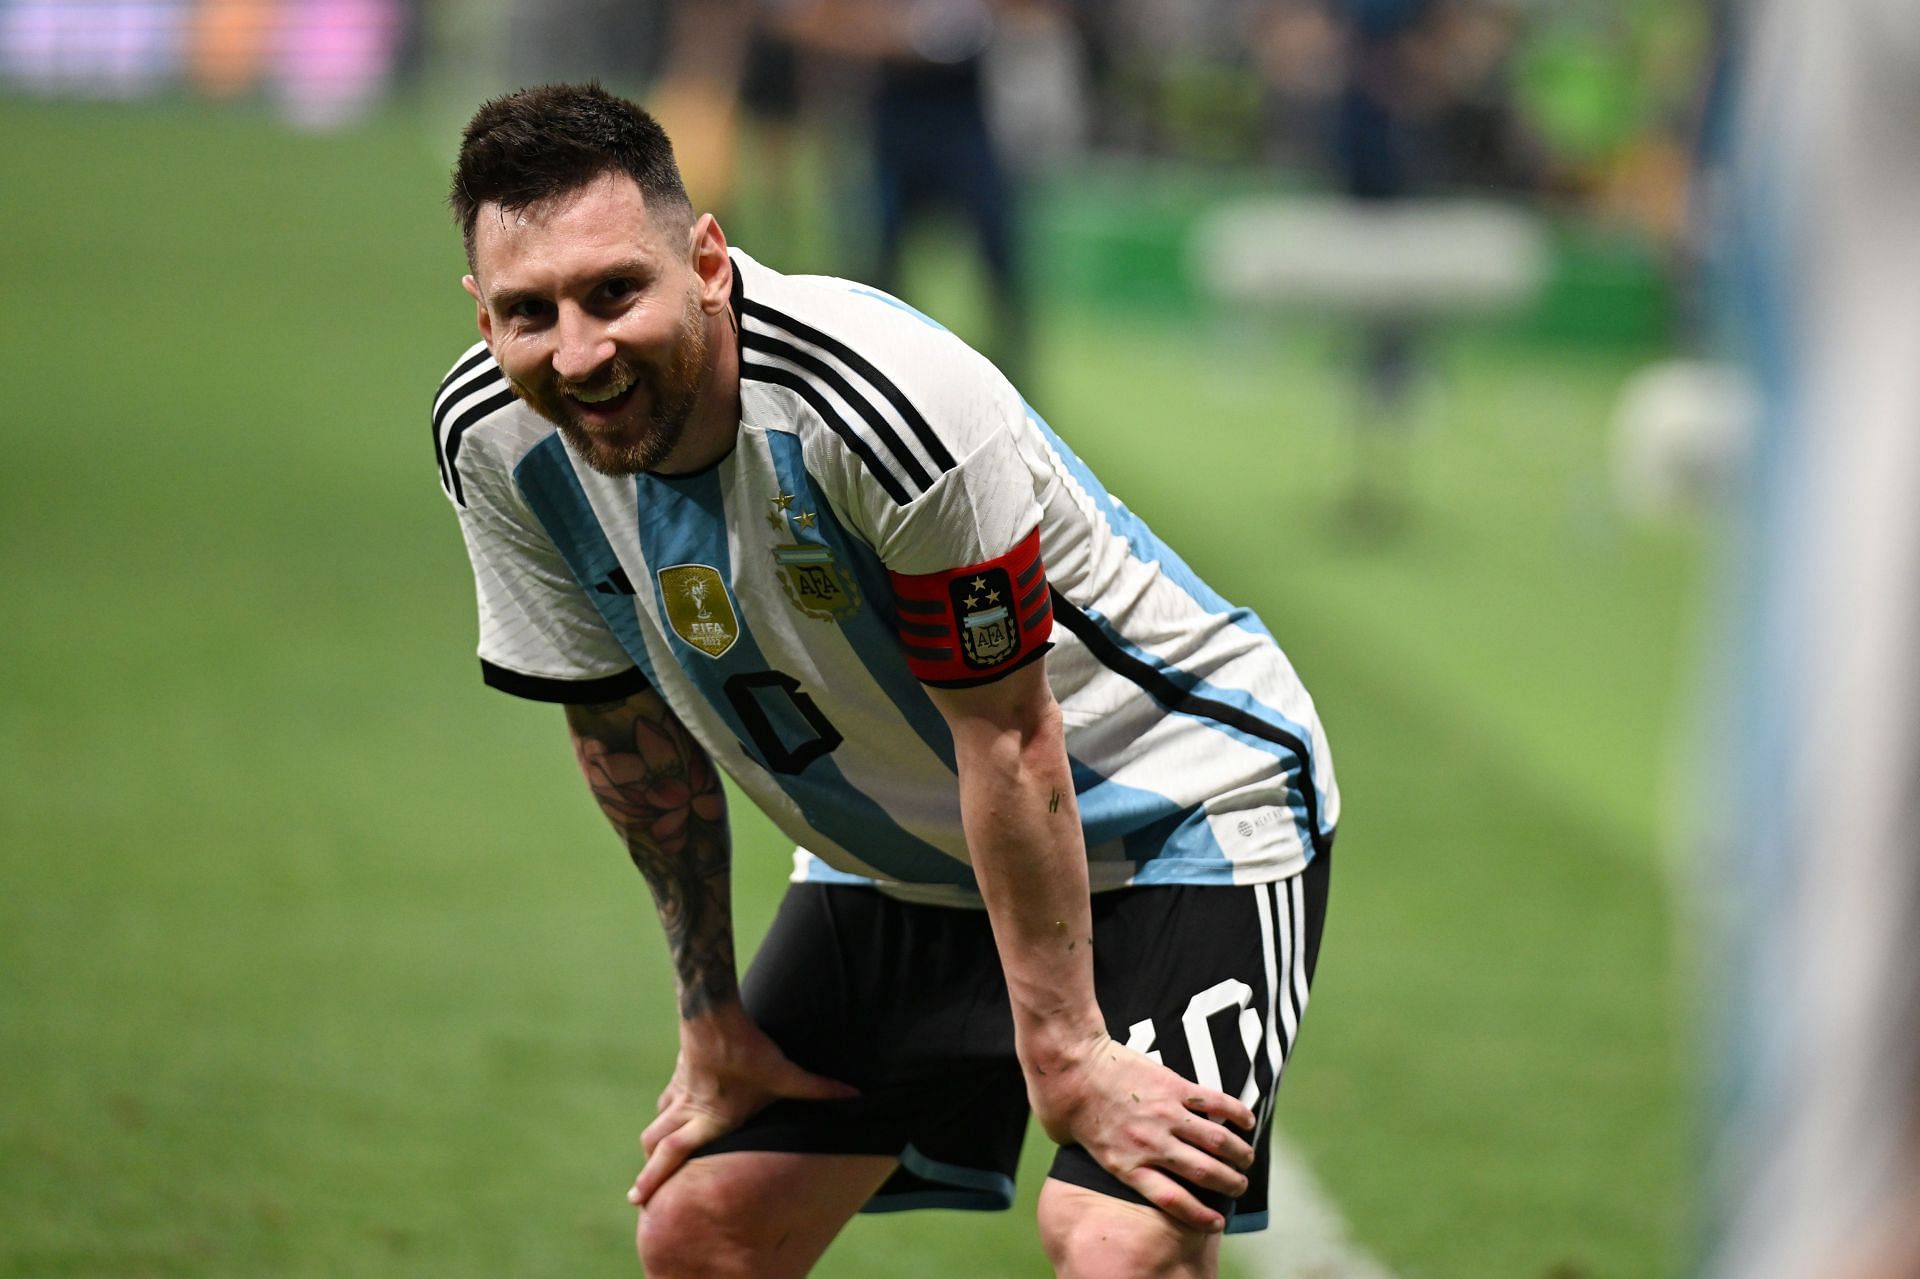 Lionel Messi has represented Argentina 175 times to date, scoring 103 goals and picking up 56 assists.